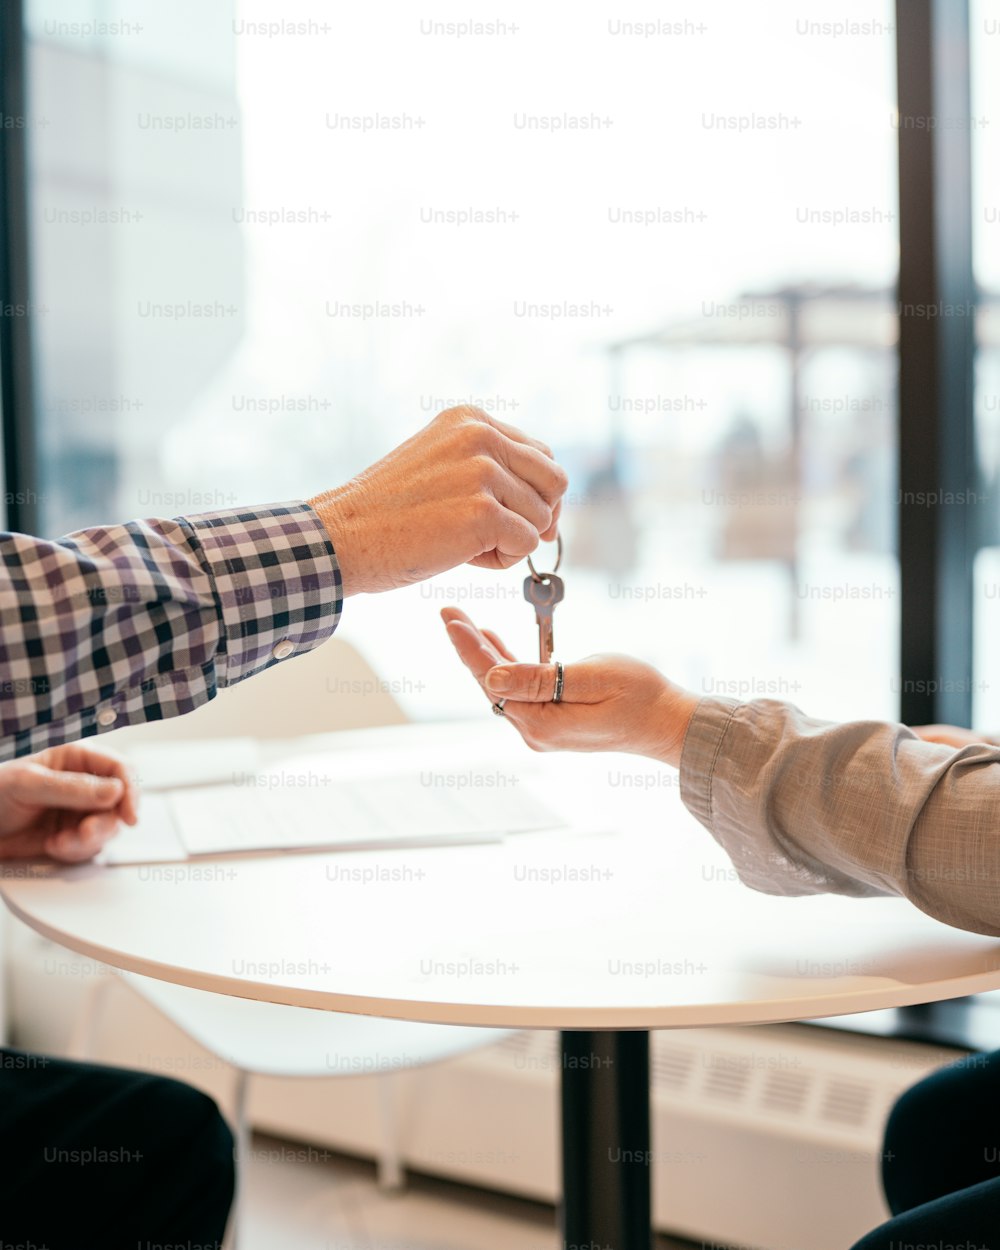 two people exchanging keys at a table